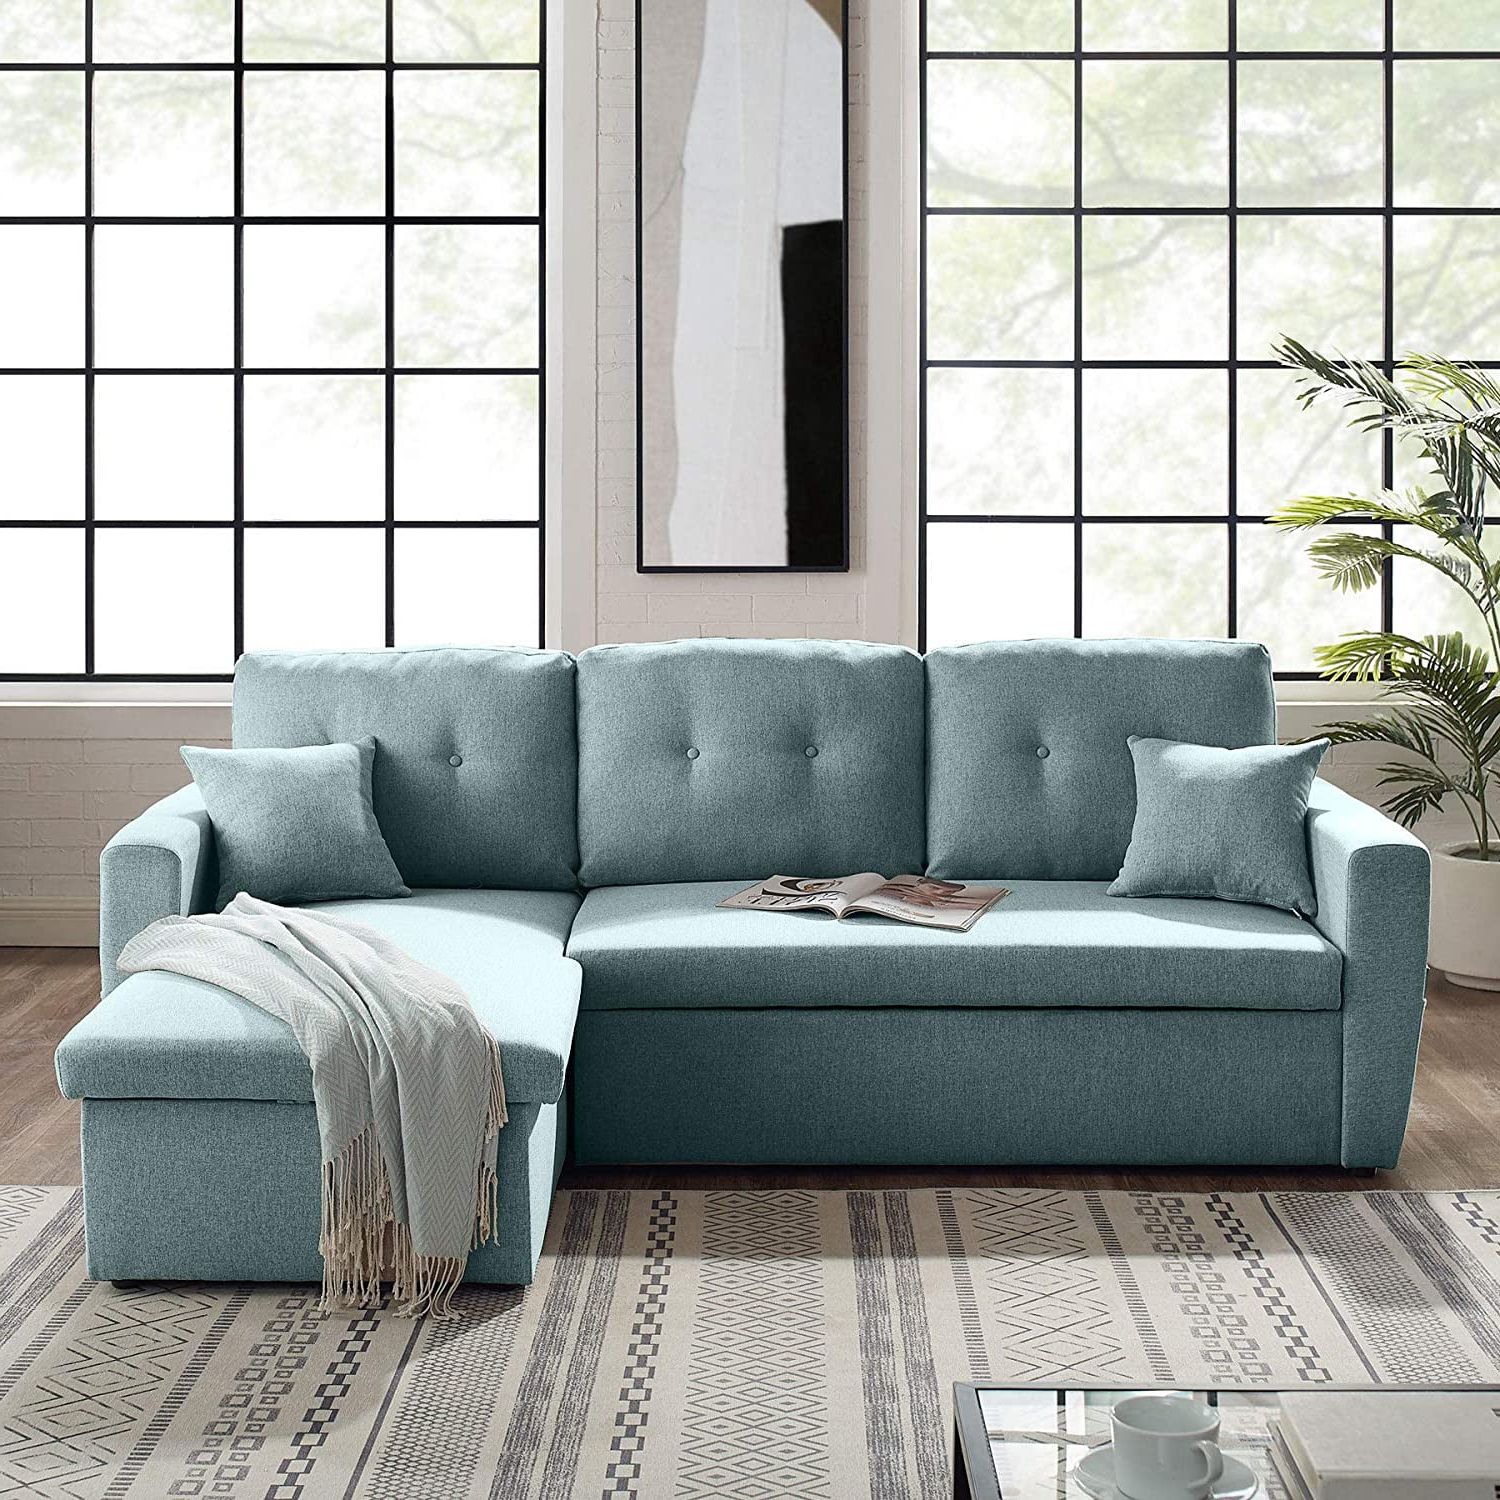 3 Seater Sofa Bed With Storage, Tribesigns 86.6” Convertible Sectional For 3 Seat Convertible Sectional Sofas (Gallery 1 of 20)